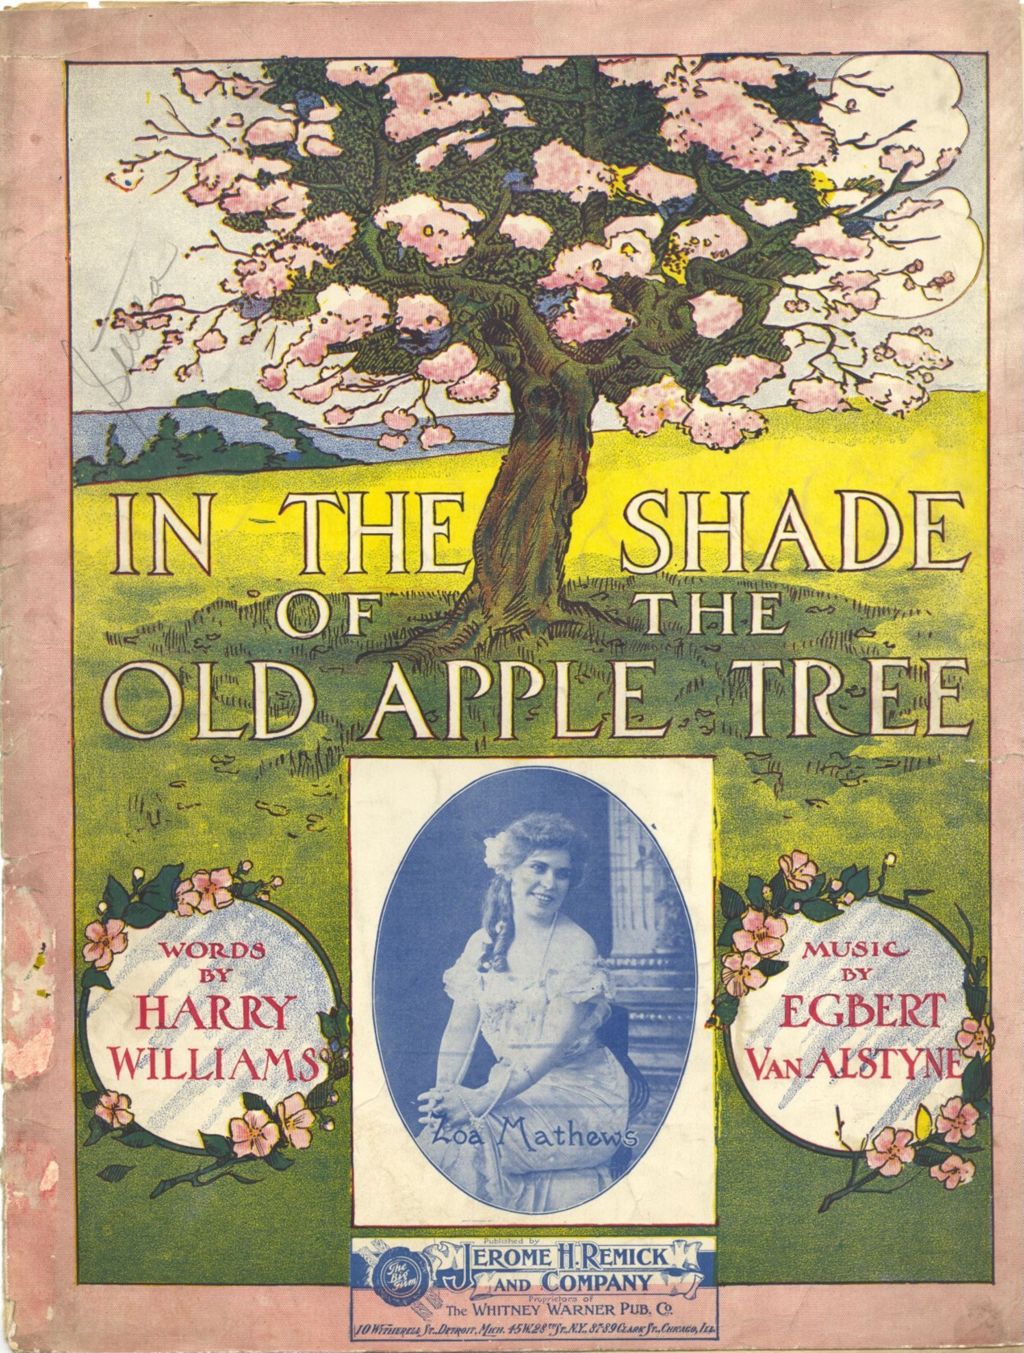 In The Shade of the Old Apple Tree